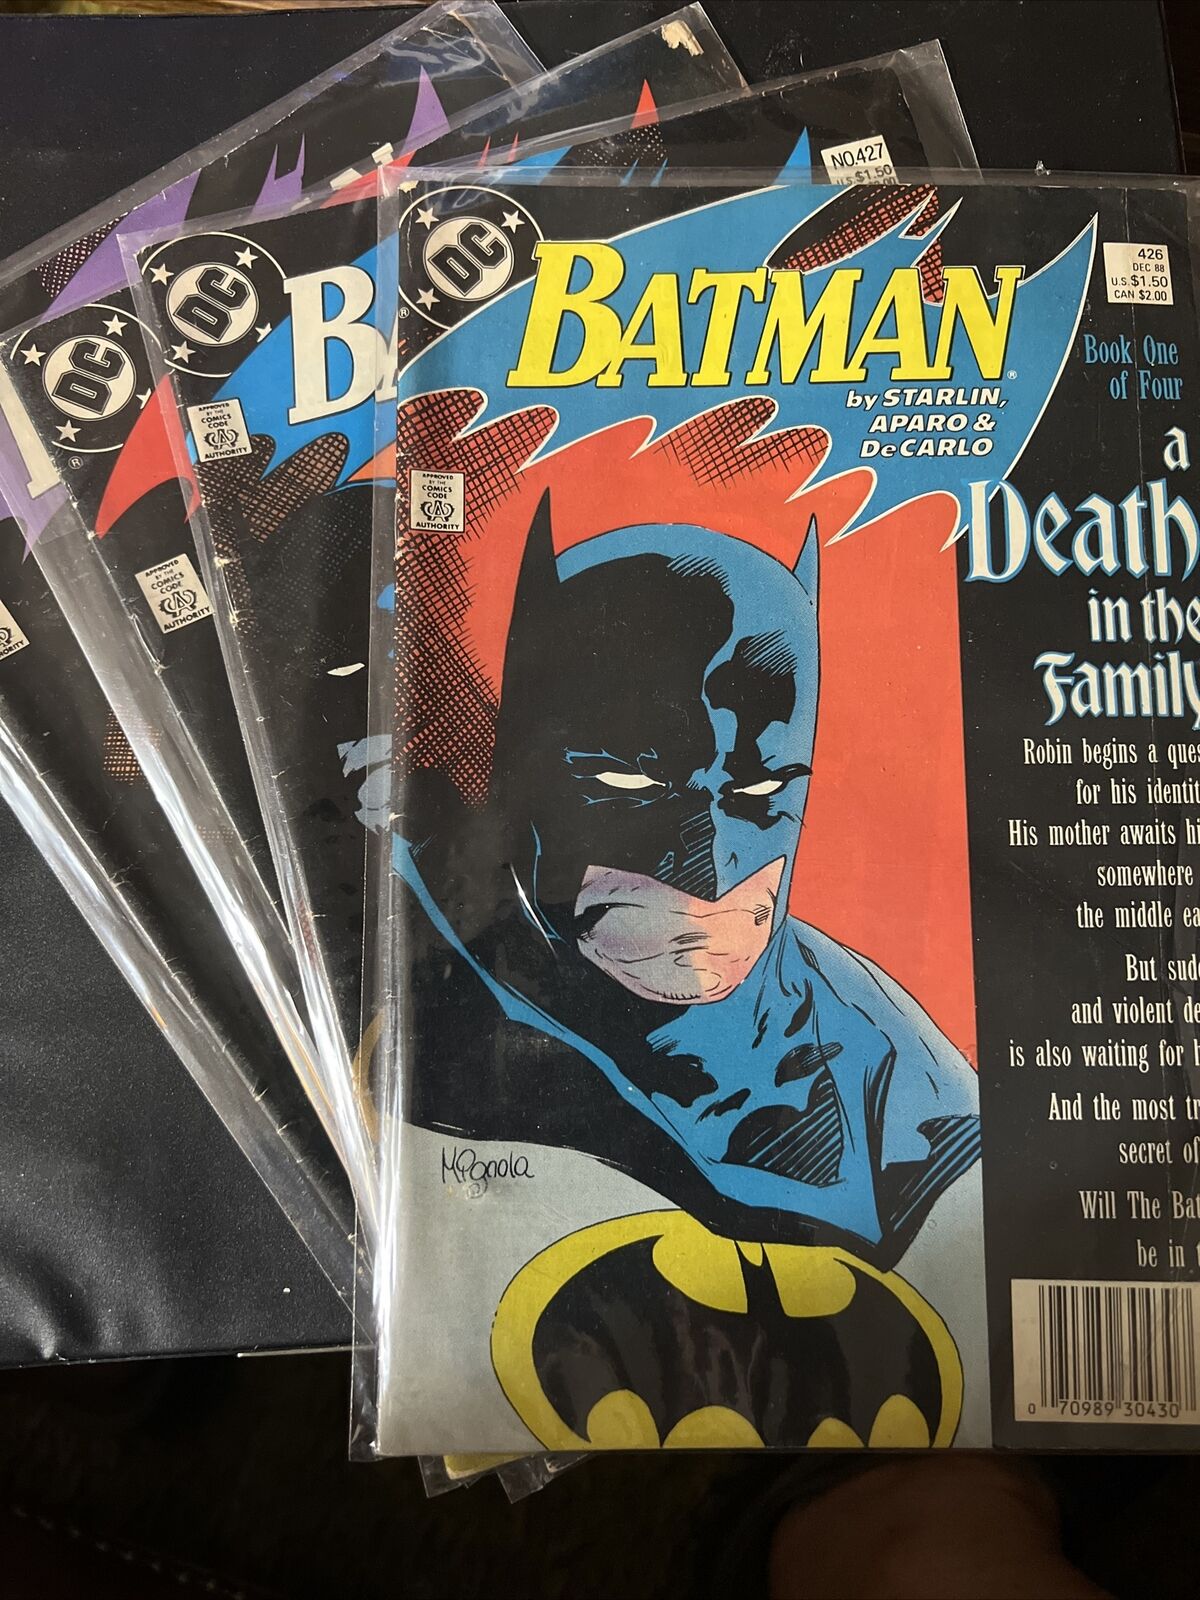 BATMAN #426;427;428;429 (DC,1988) COMICS A DEATH IN THE FAMILY COMPLETE SERIES 